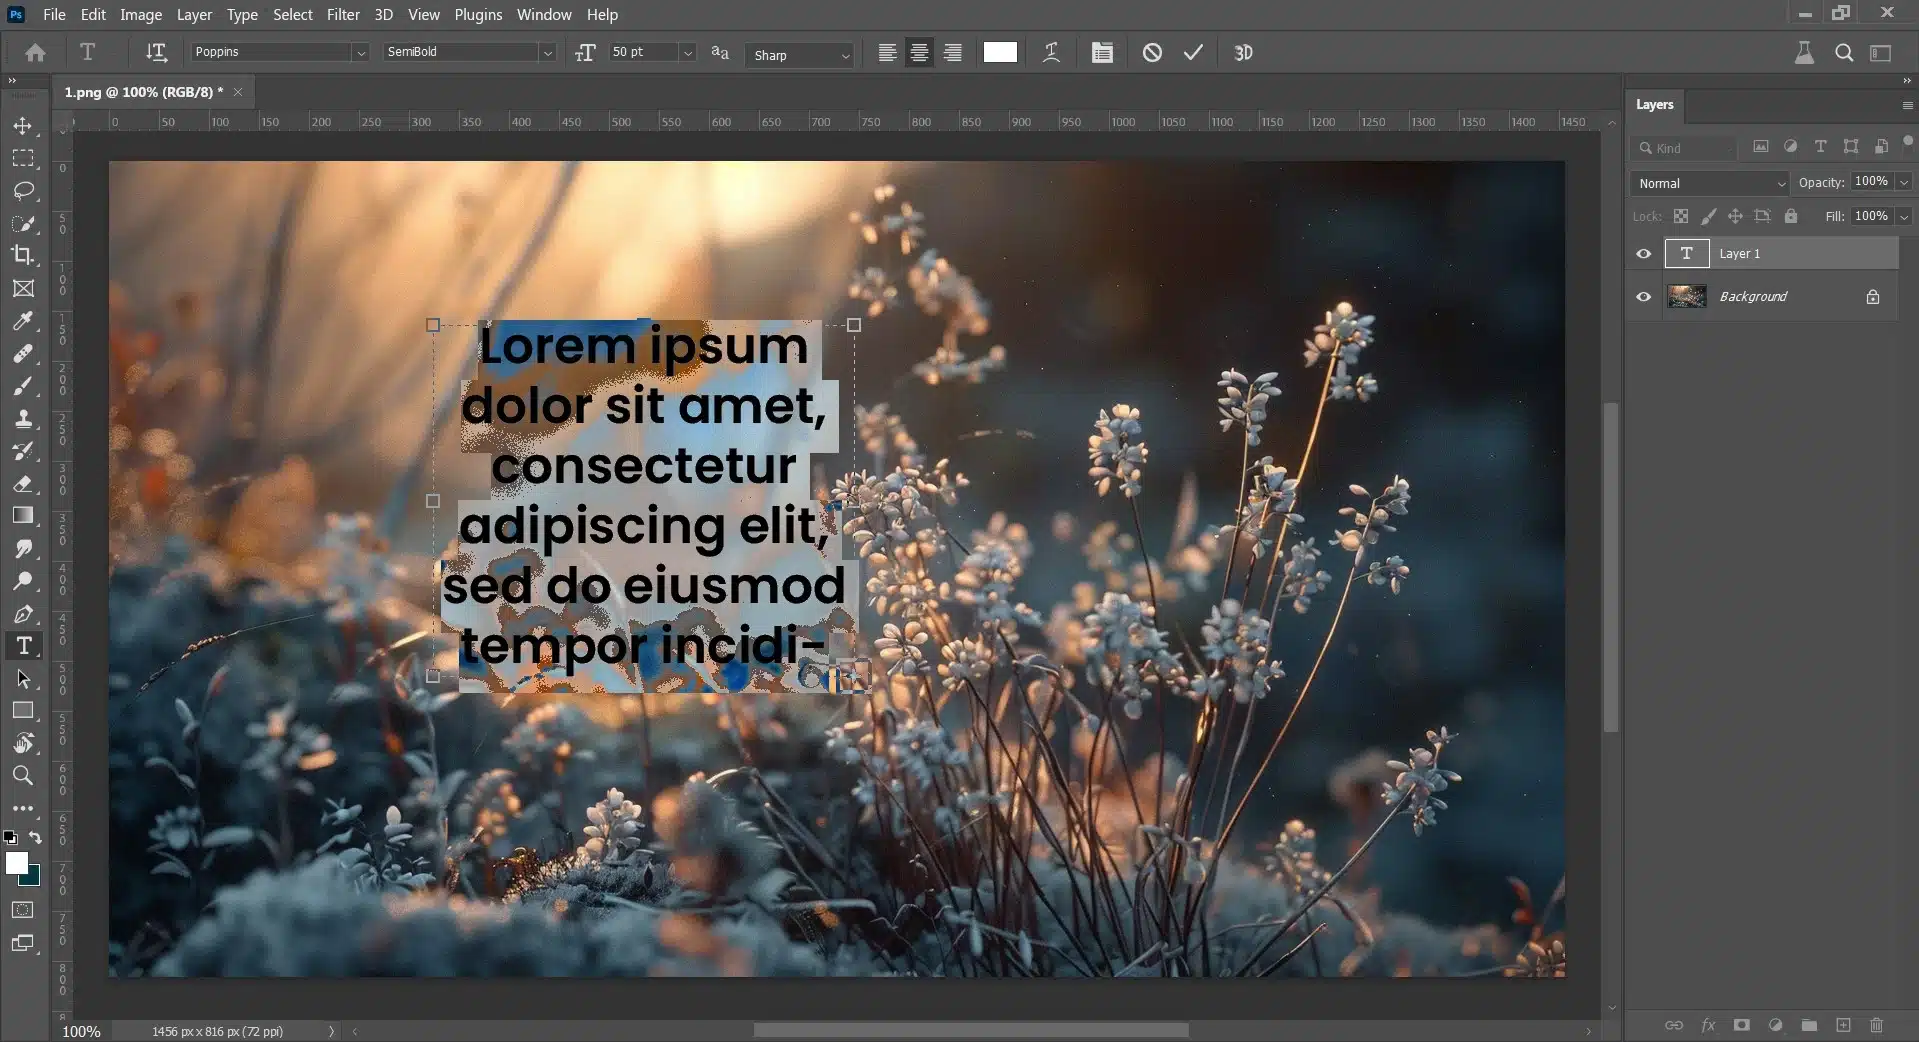 Screenshot of a graphic design interface showing text overlay on an image of small flowers in soft focus with a warm, golden lighting.